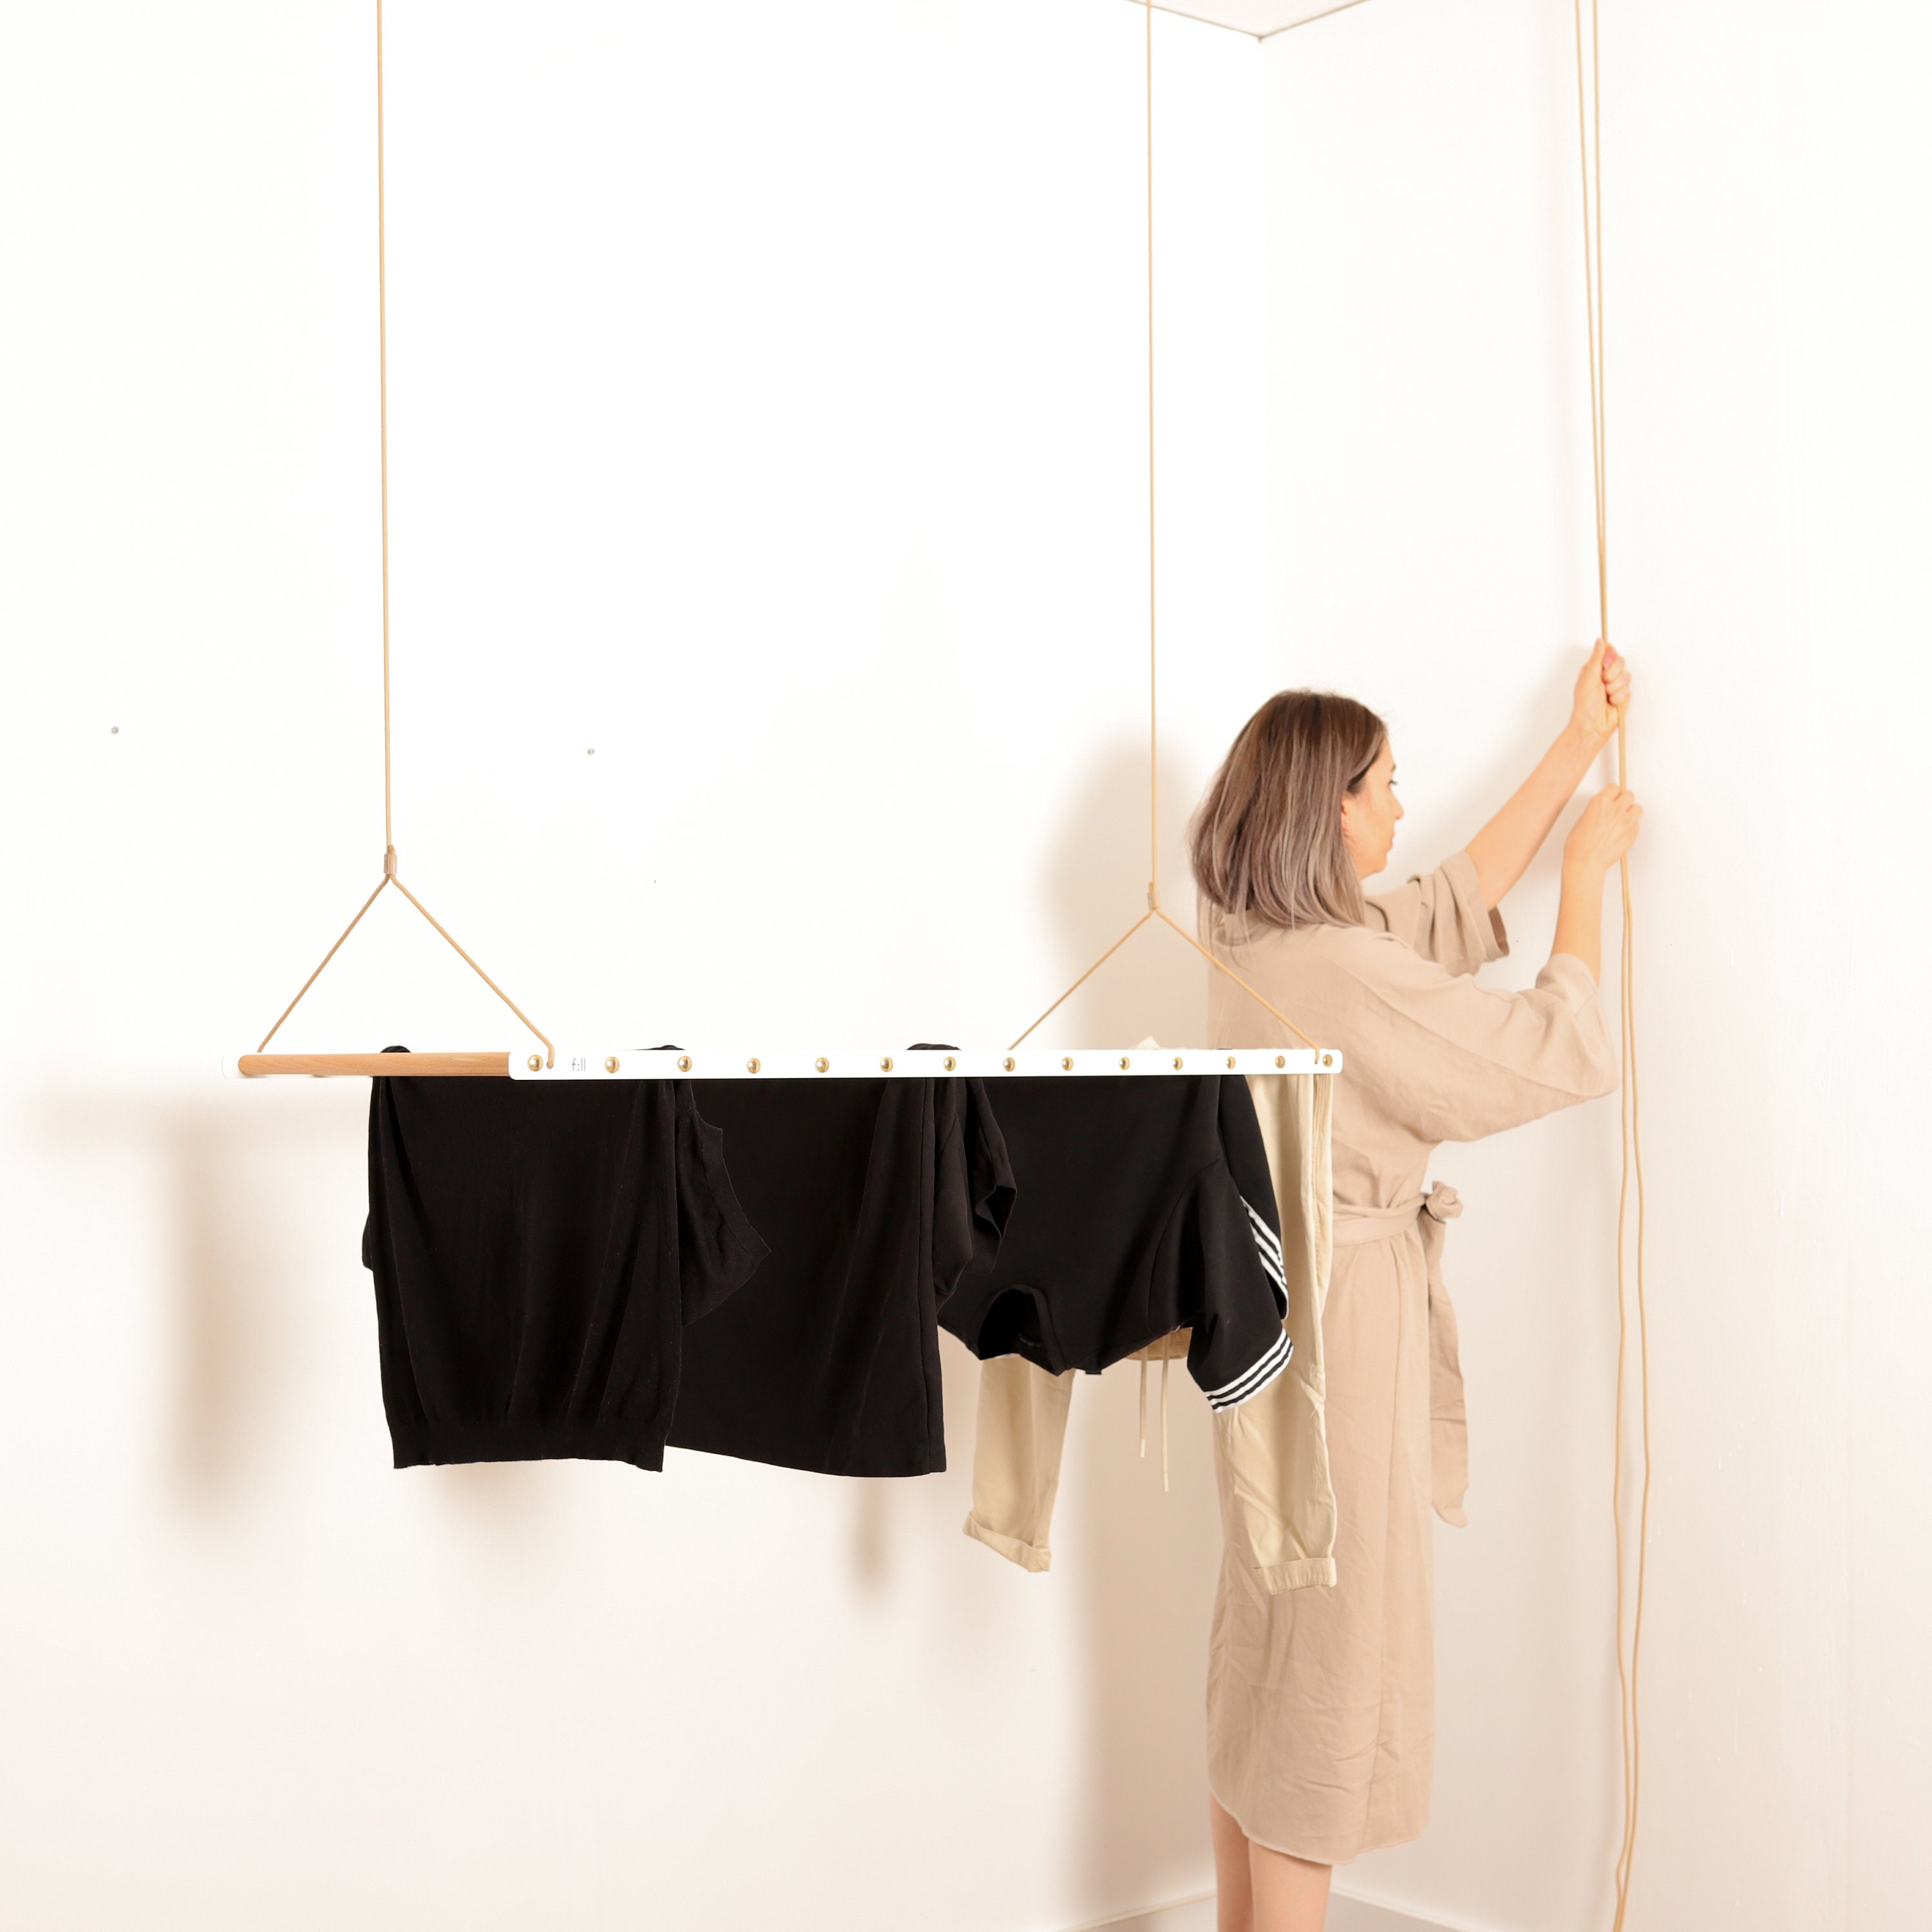 Wall / Ceiling Mounted Clothes Drying Rack, Clothes Airer, Hanging